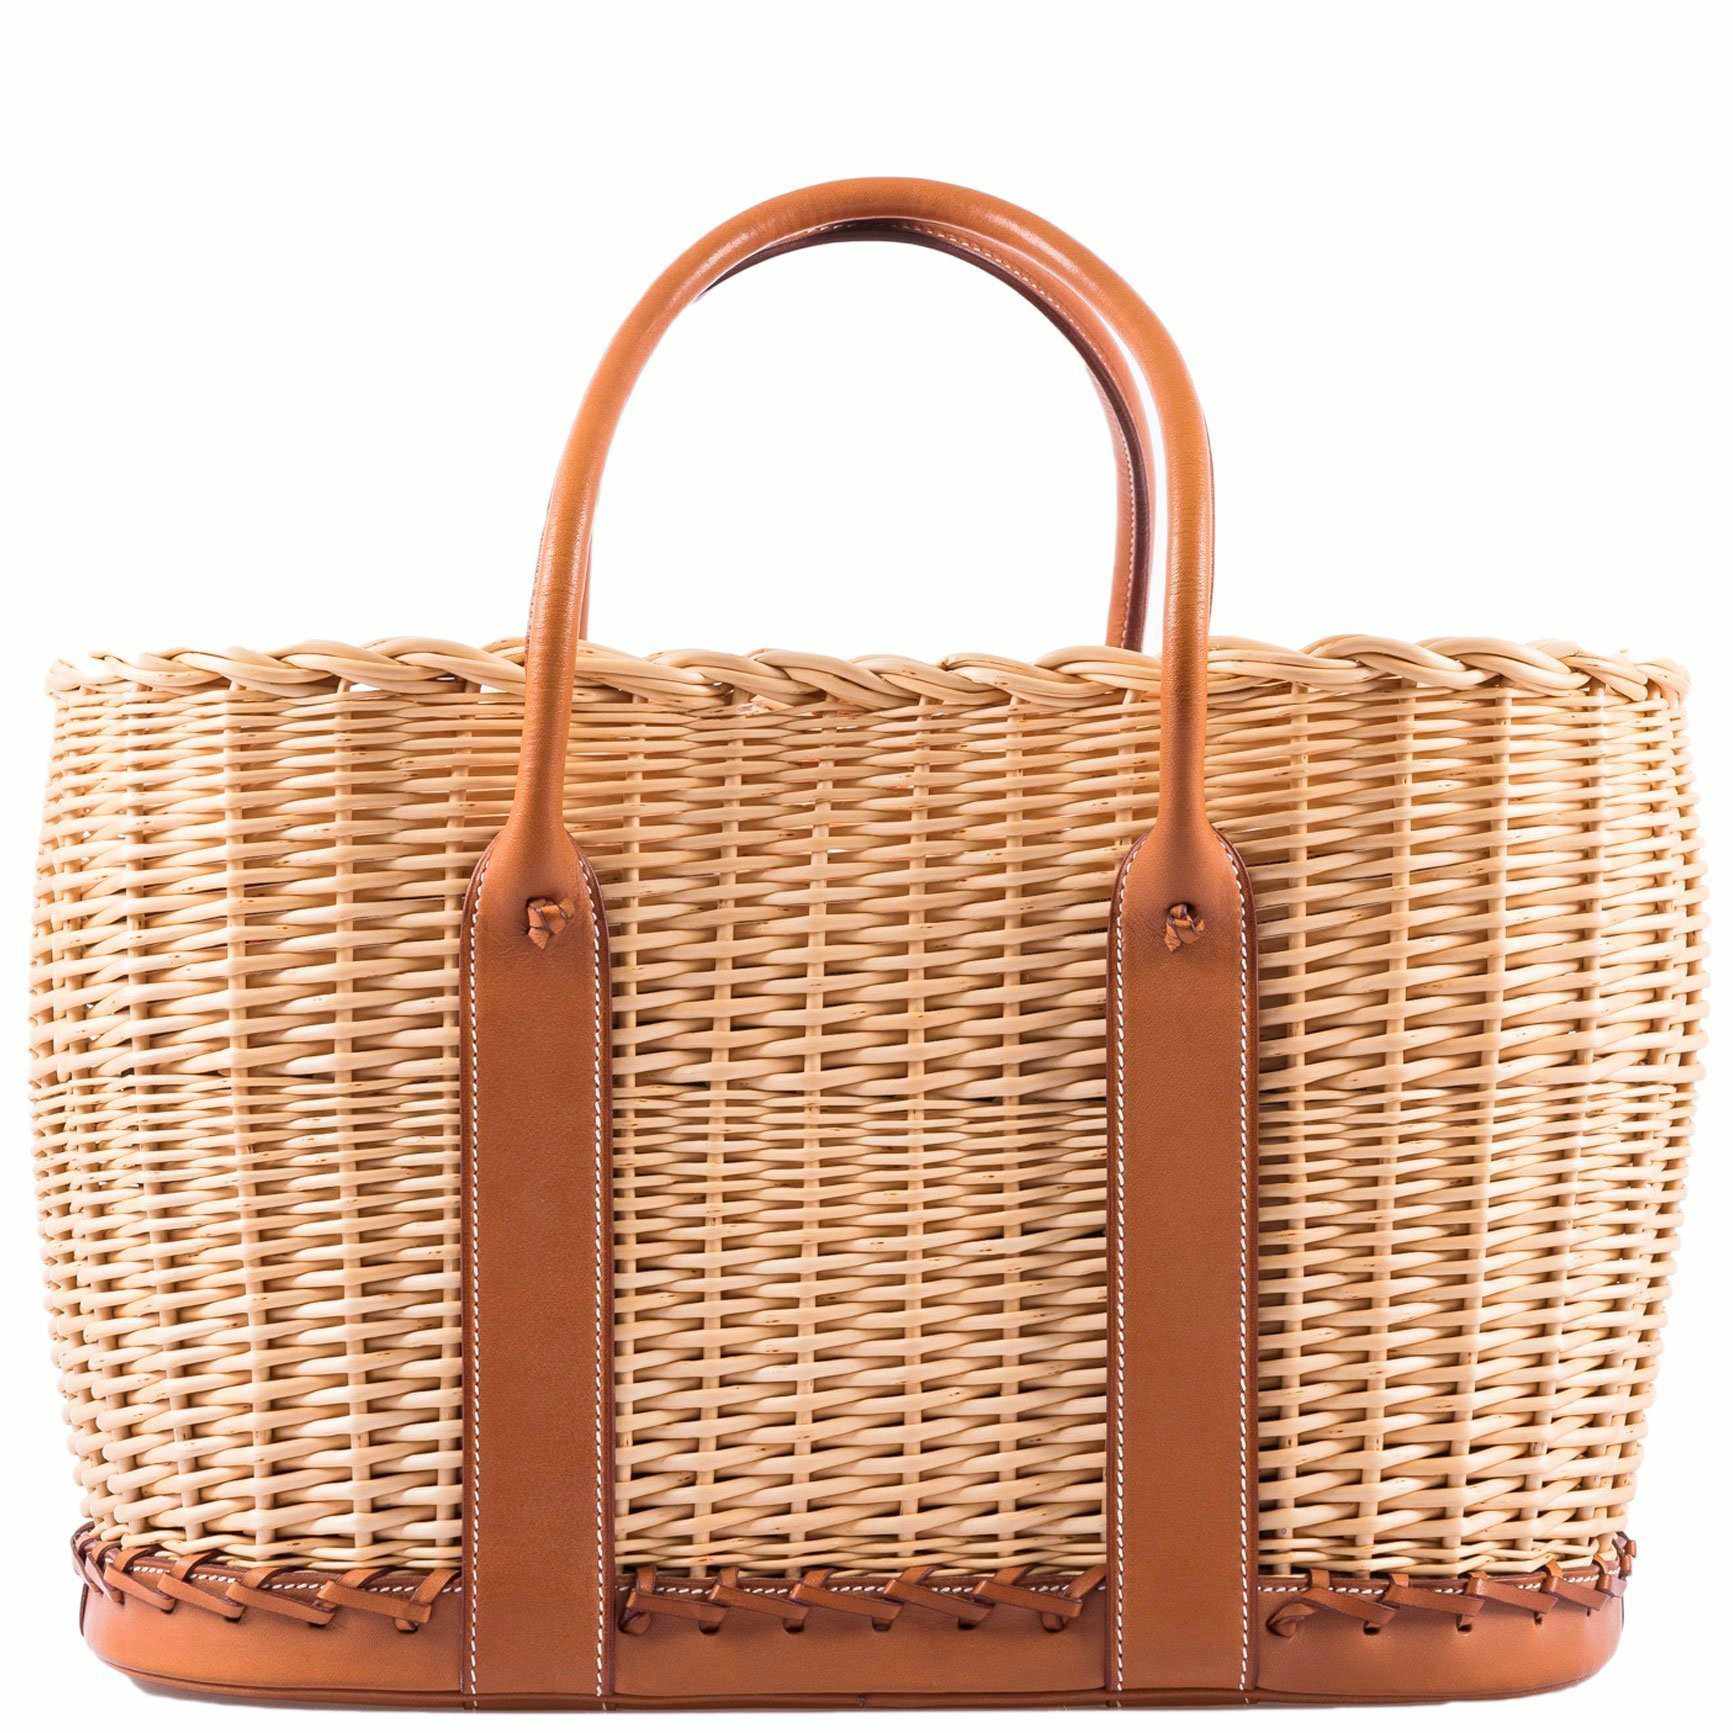 Up your summer bag game with these Jane Birkin-inspired basket